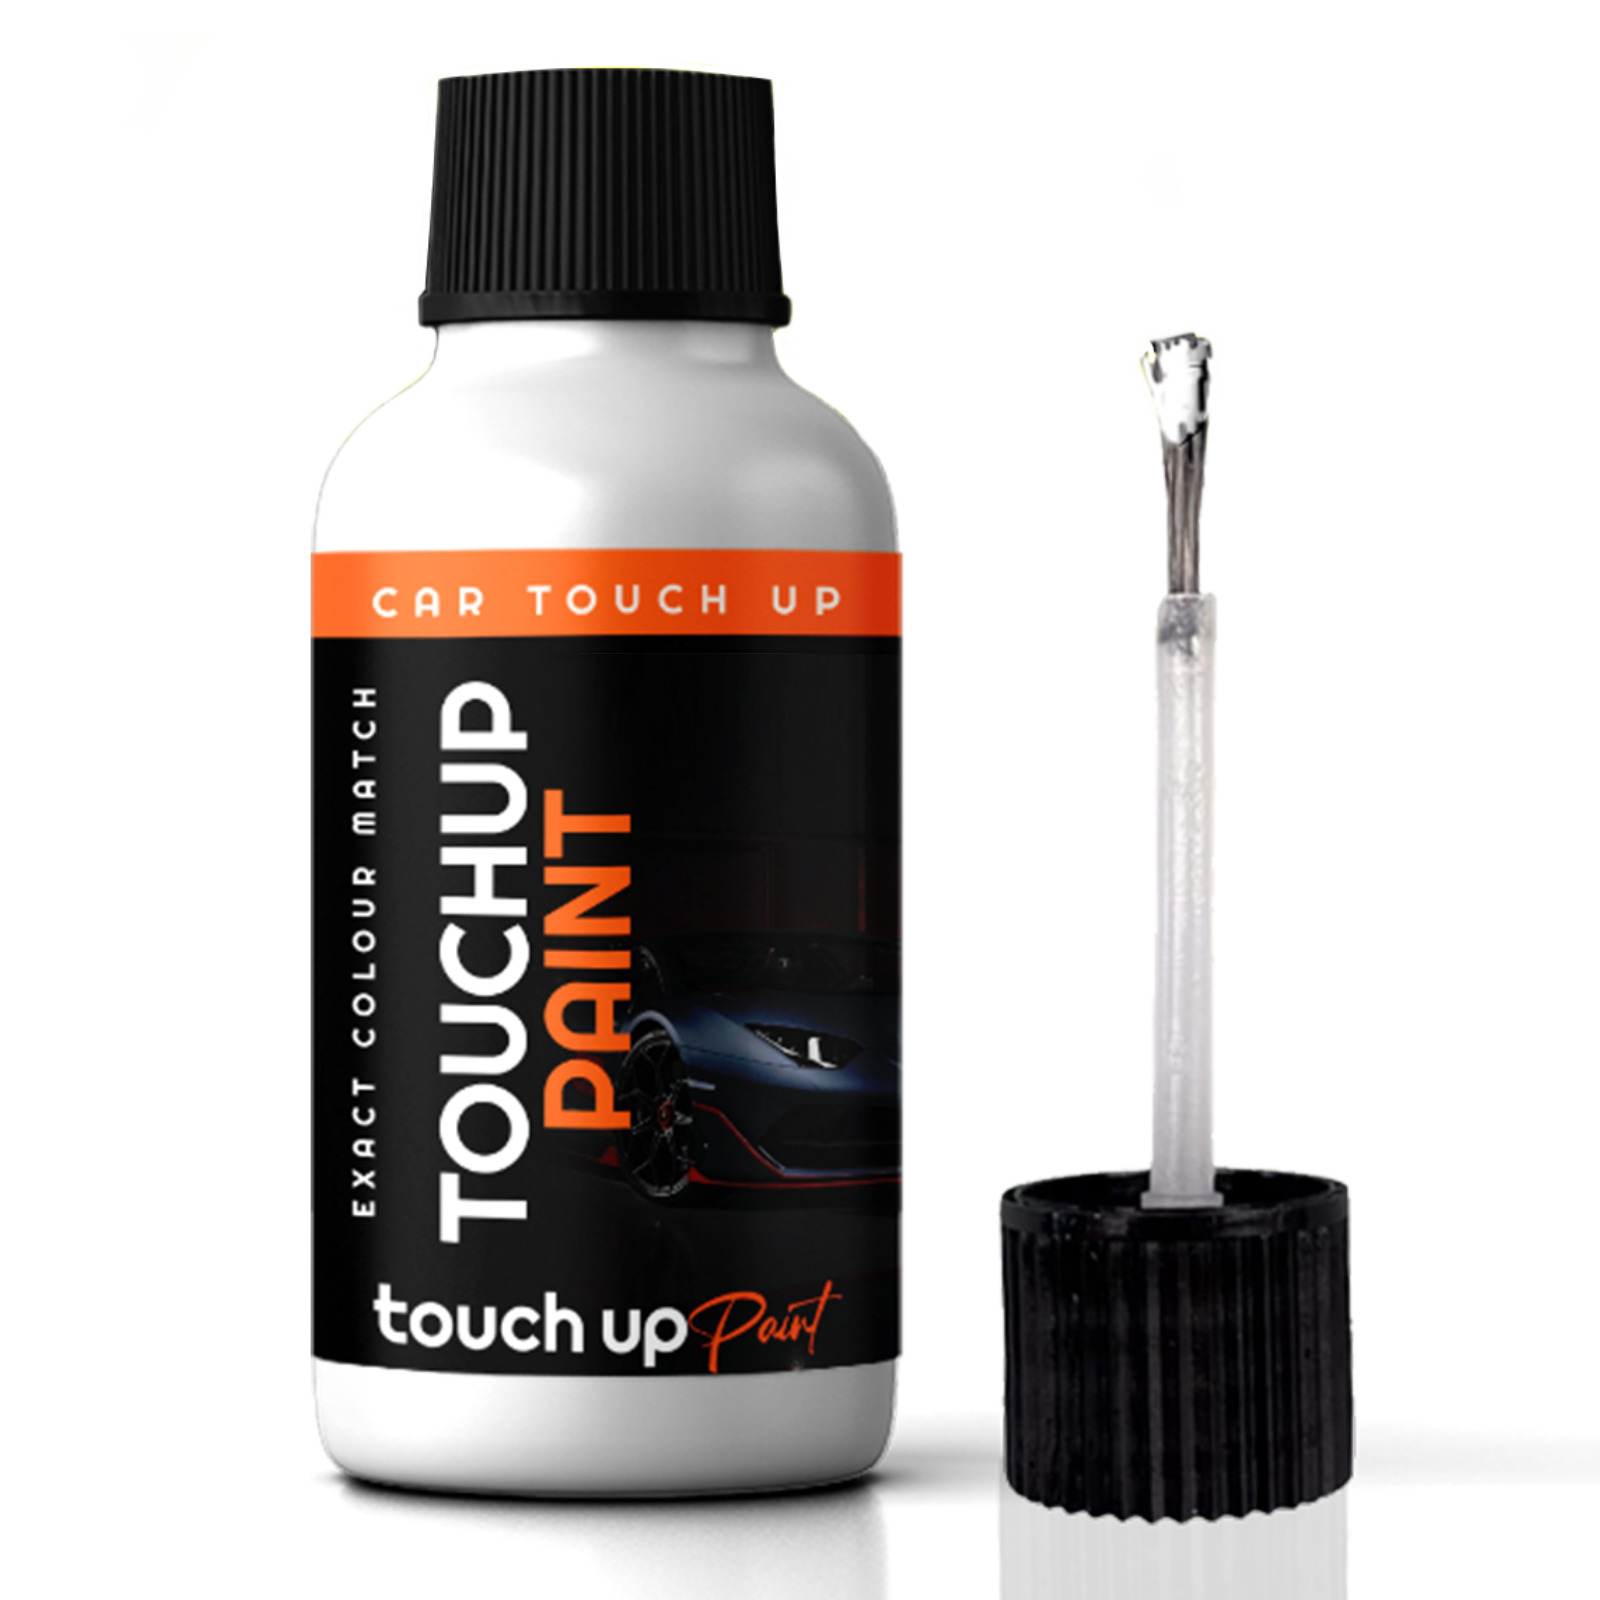 Touch Up Paint For Toyota Tercel Super Red 3.00e+05, 3e5 30ml Bottle